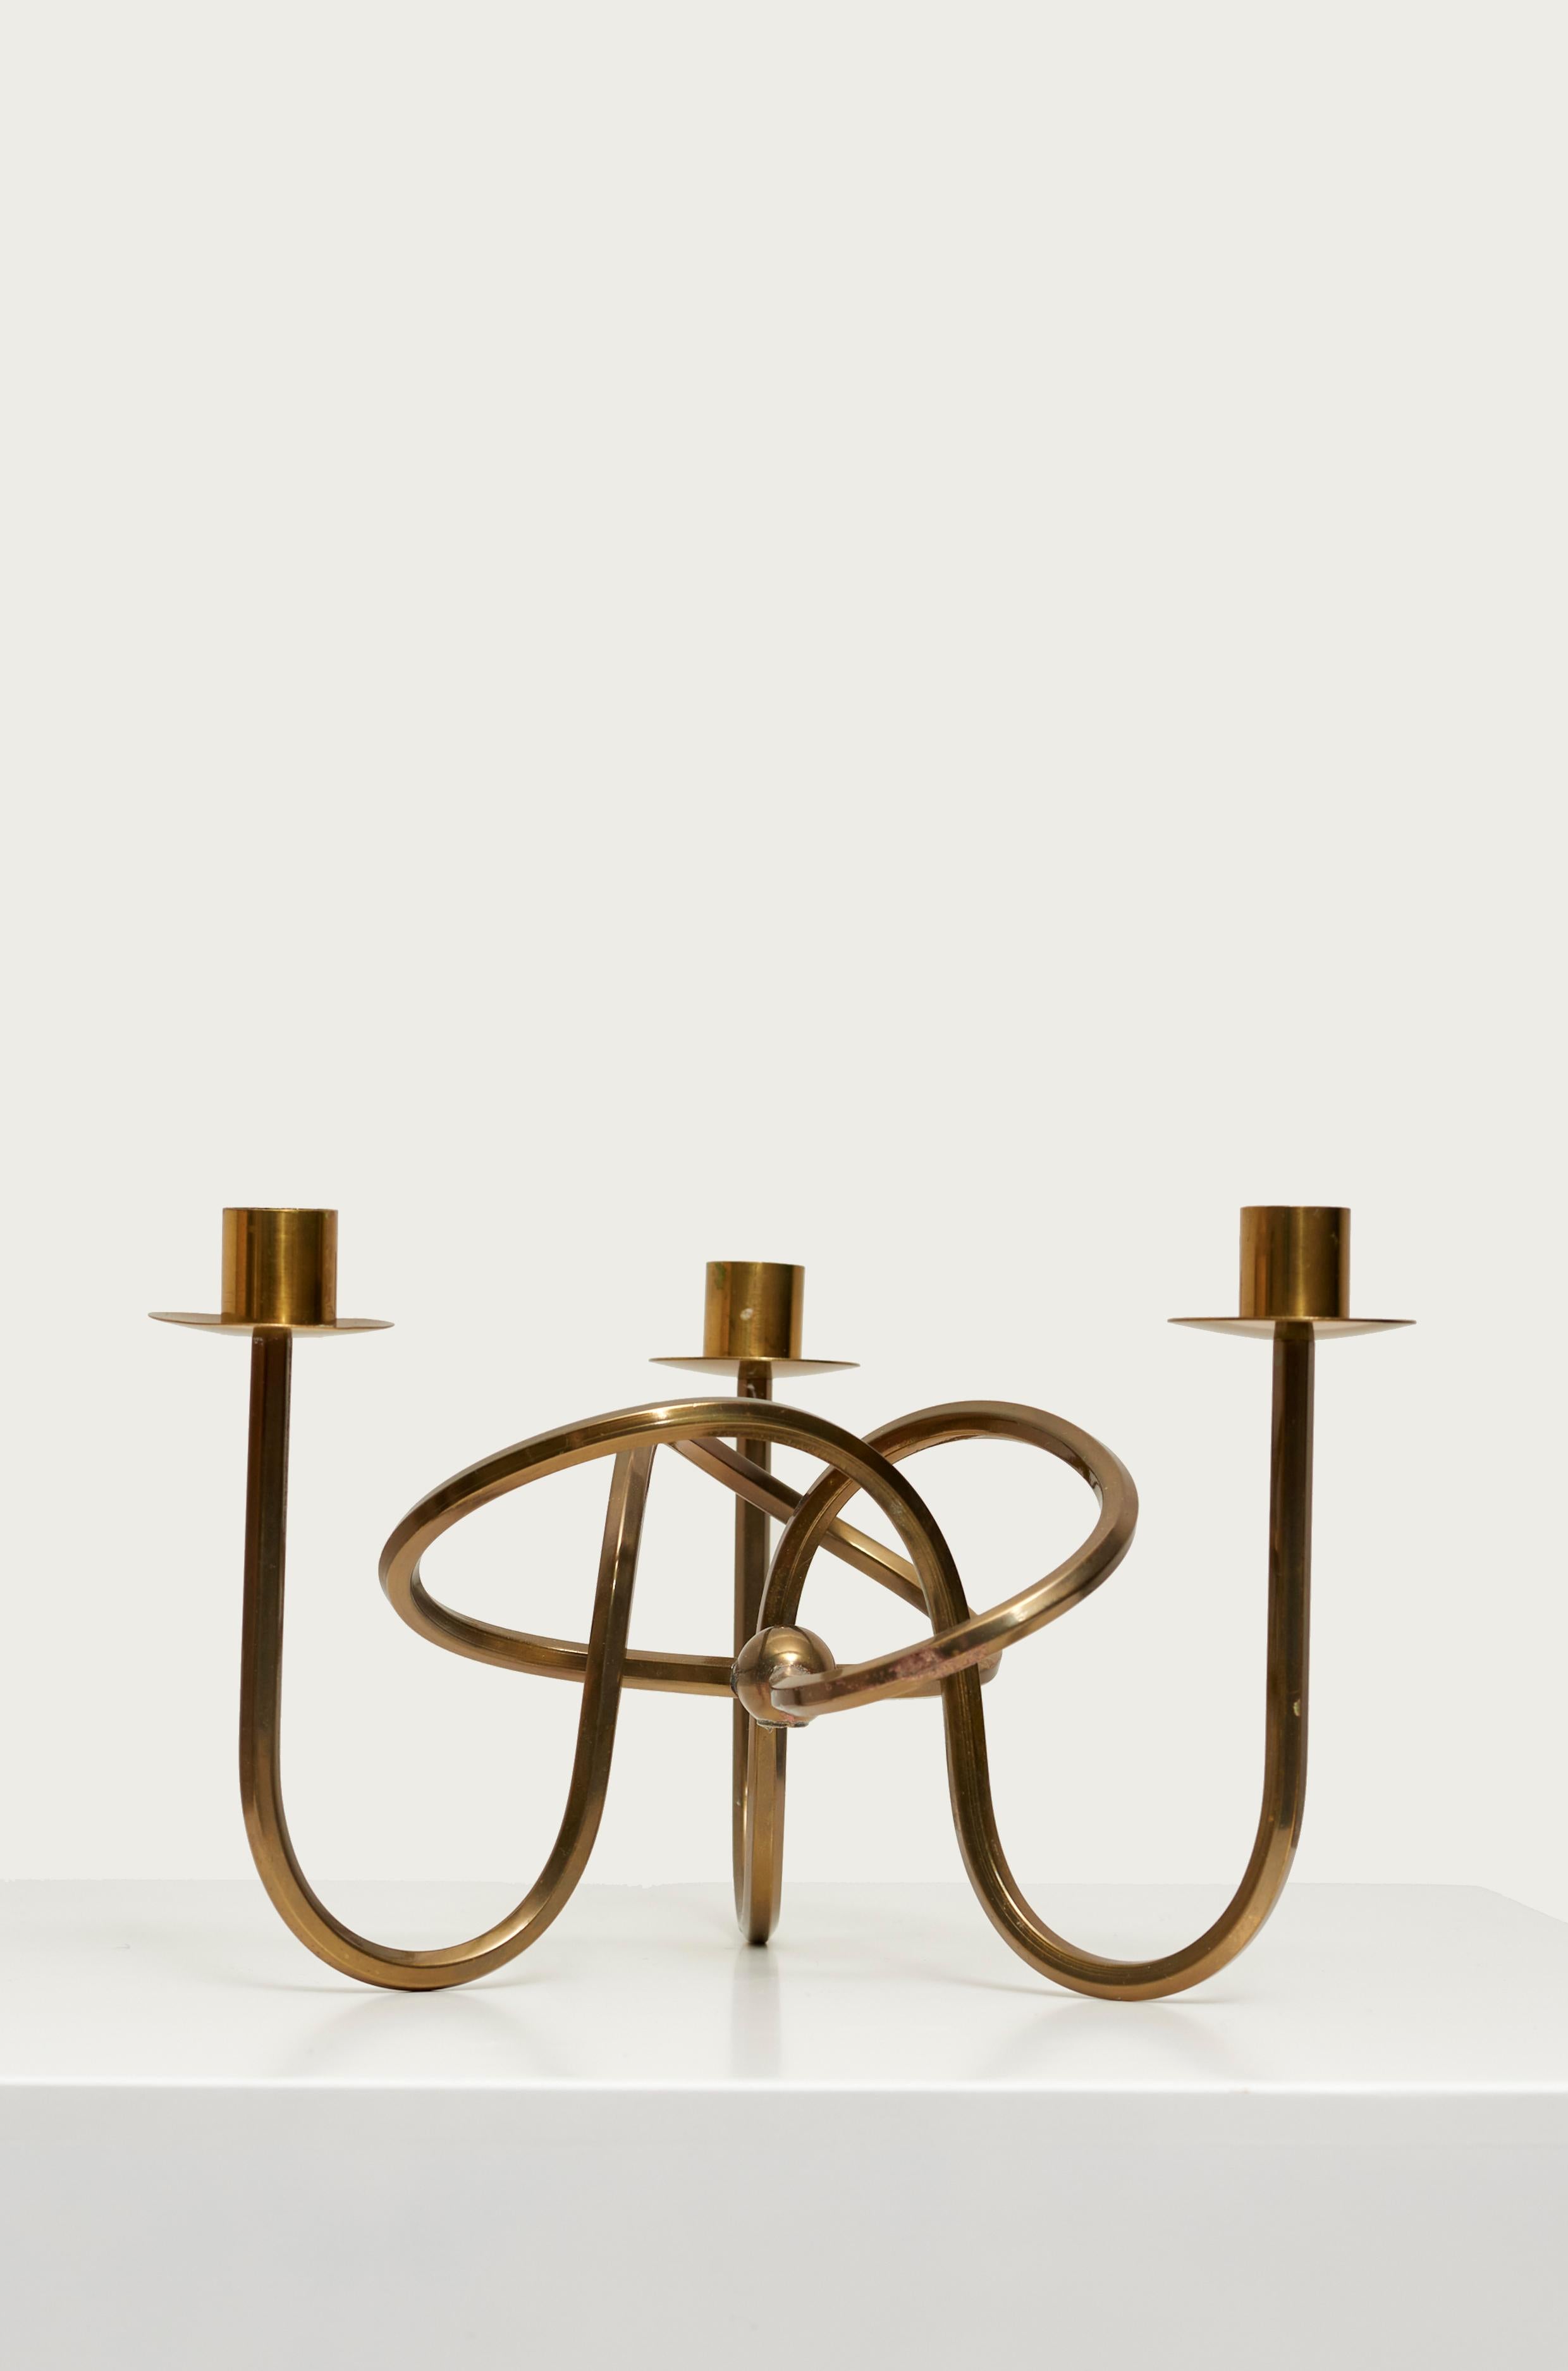 Candleholder in brass ''Friendshipknot'' designed by Josef frank for Svennsk Tenn in the 1930s. Sweden, 1960s.
Excellent condition with beautiful Patina.
 